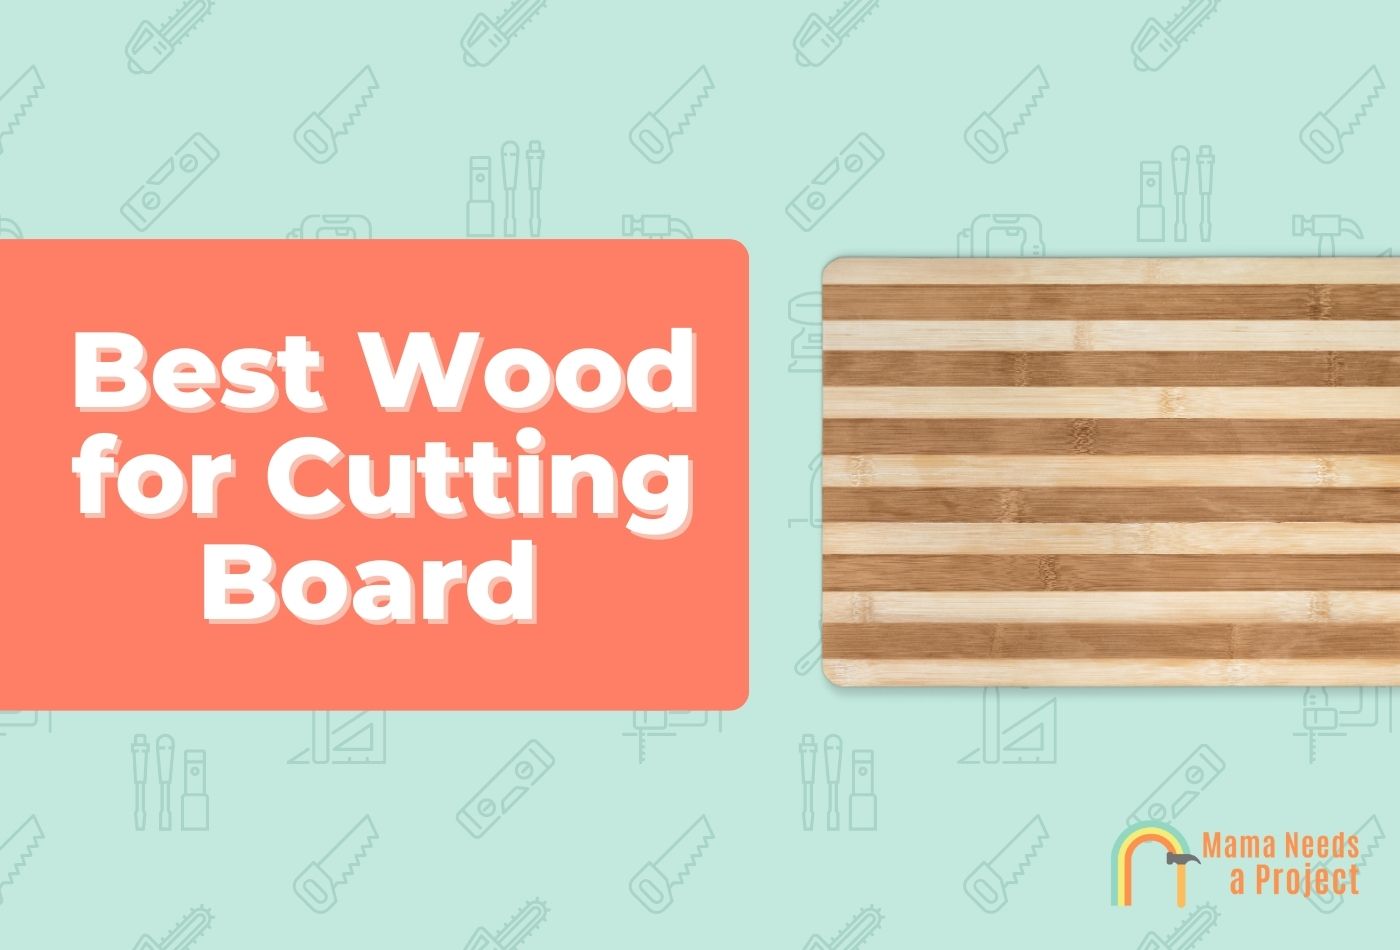 Best Wood for Cutting Board